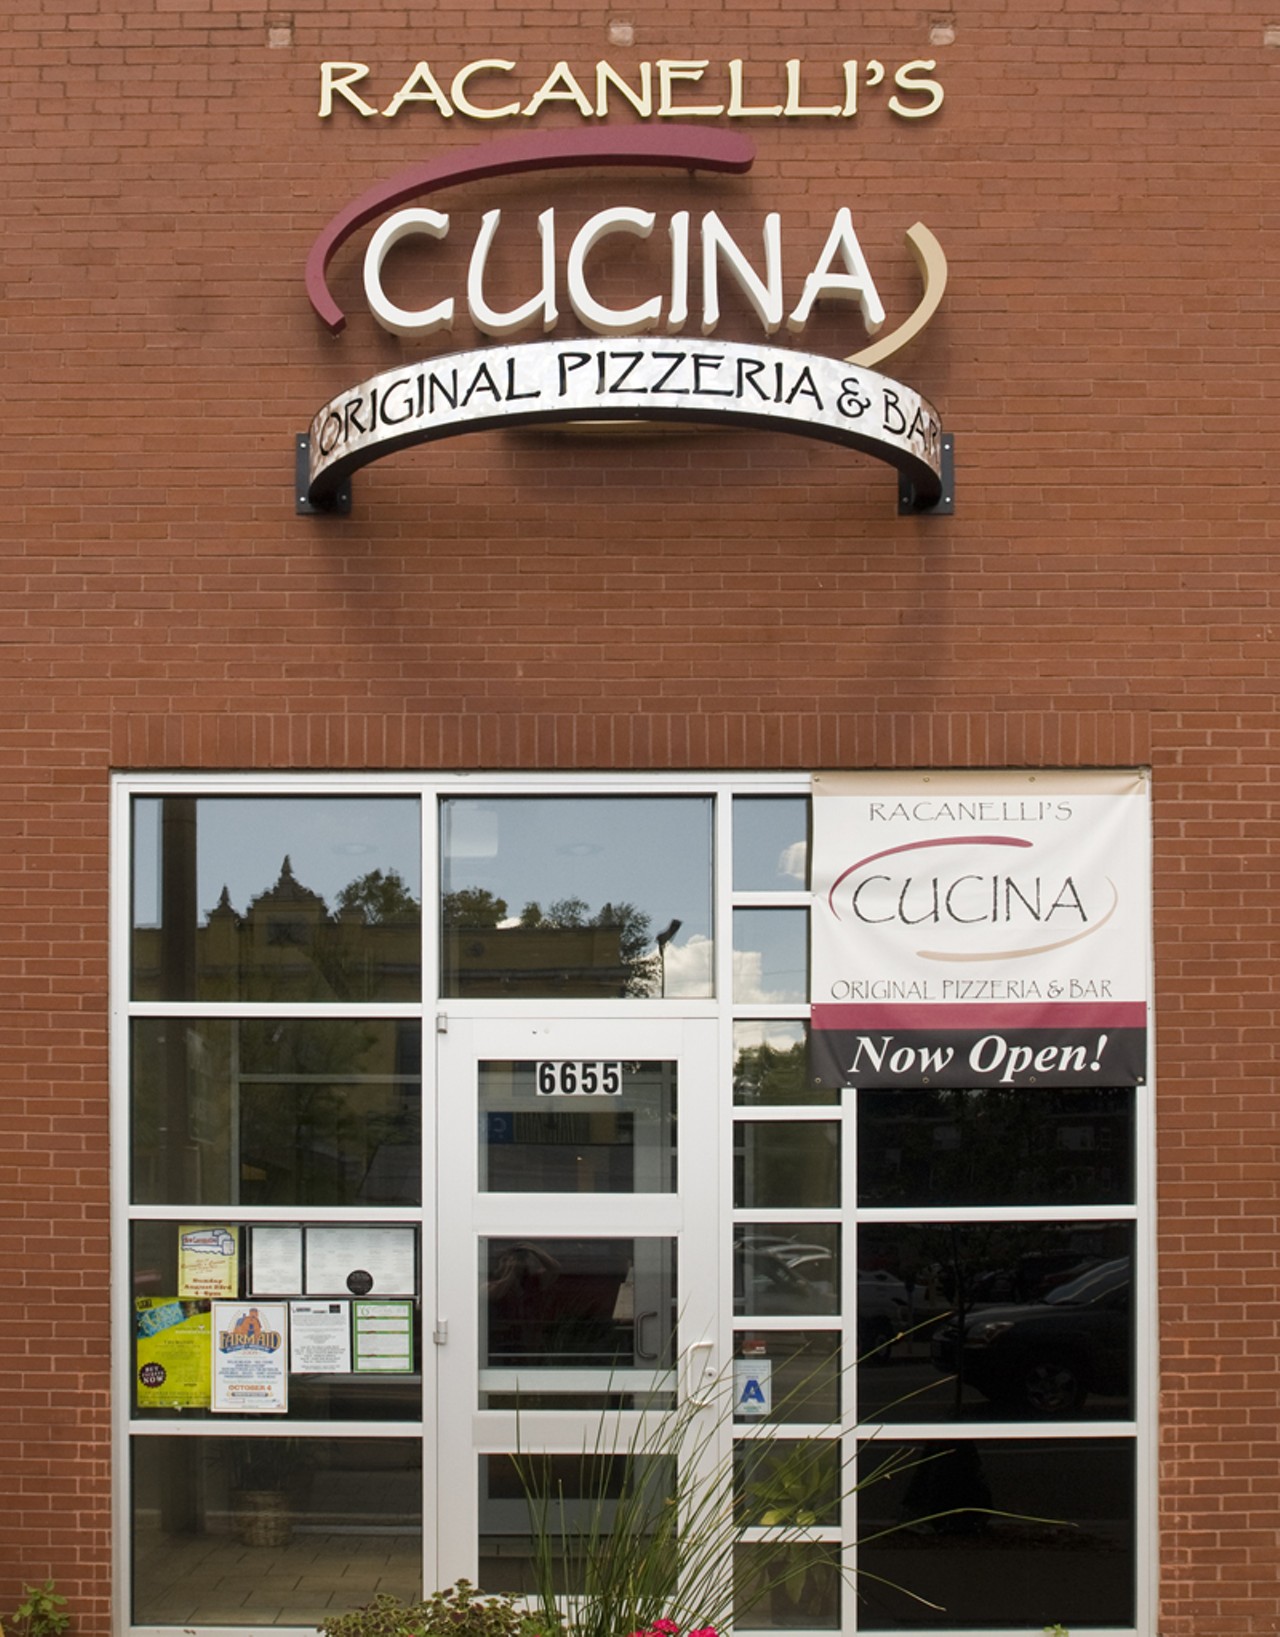 Racanelli&rsquo;s Cucina is John Racanelli&rsquo;s latest venture in the Racanelli chain. It is located at 6655 Delmar Boulevard in the Loop.